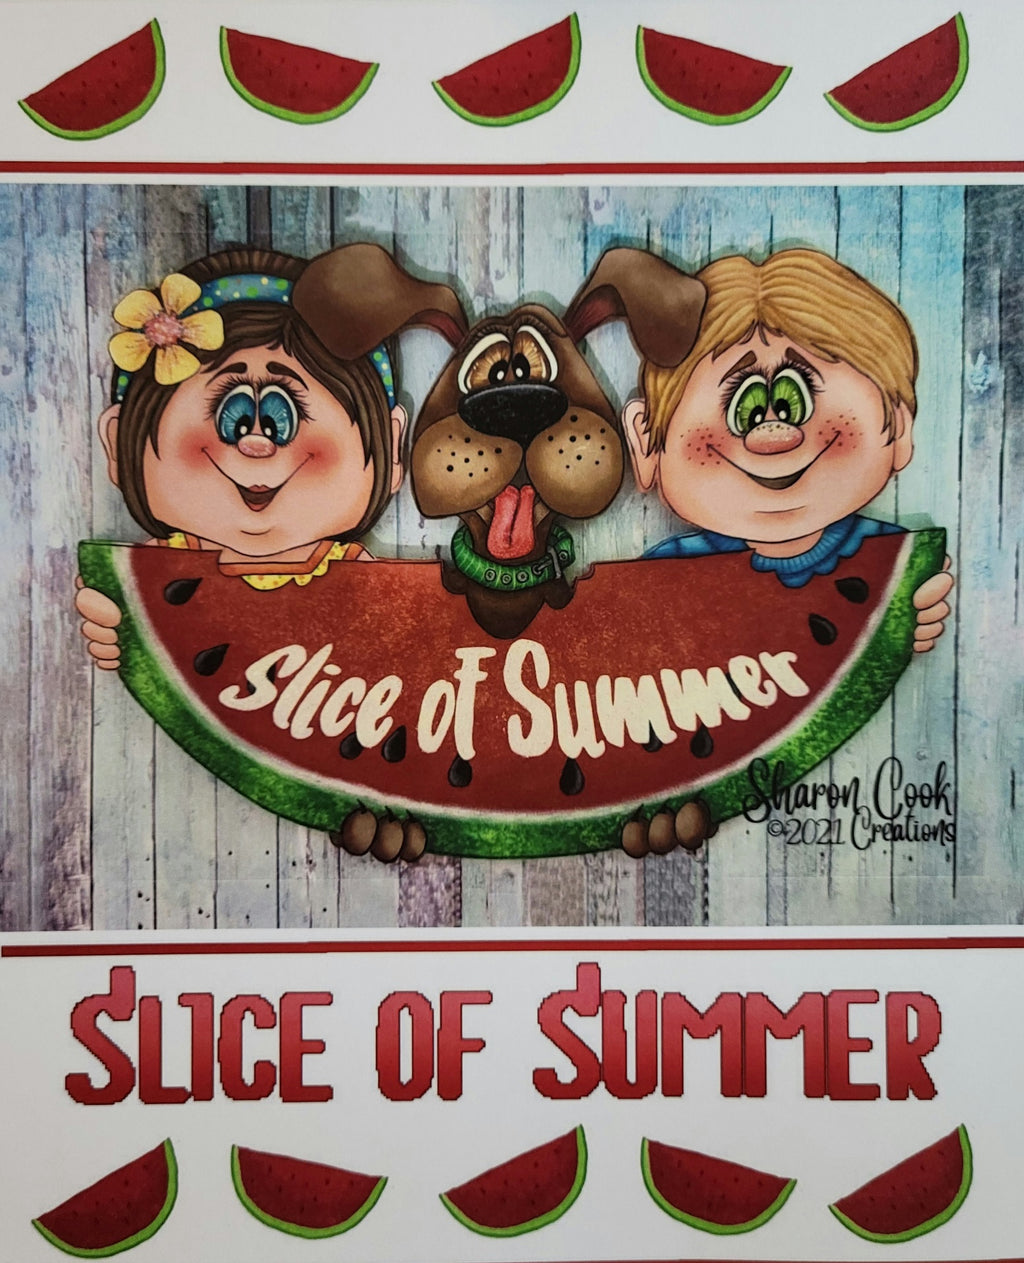 Slice of Summer packet by Sharon Cook